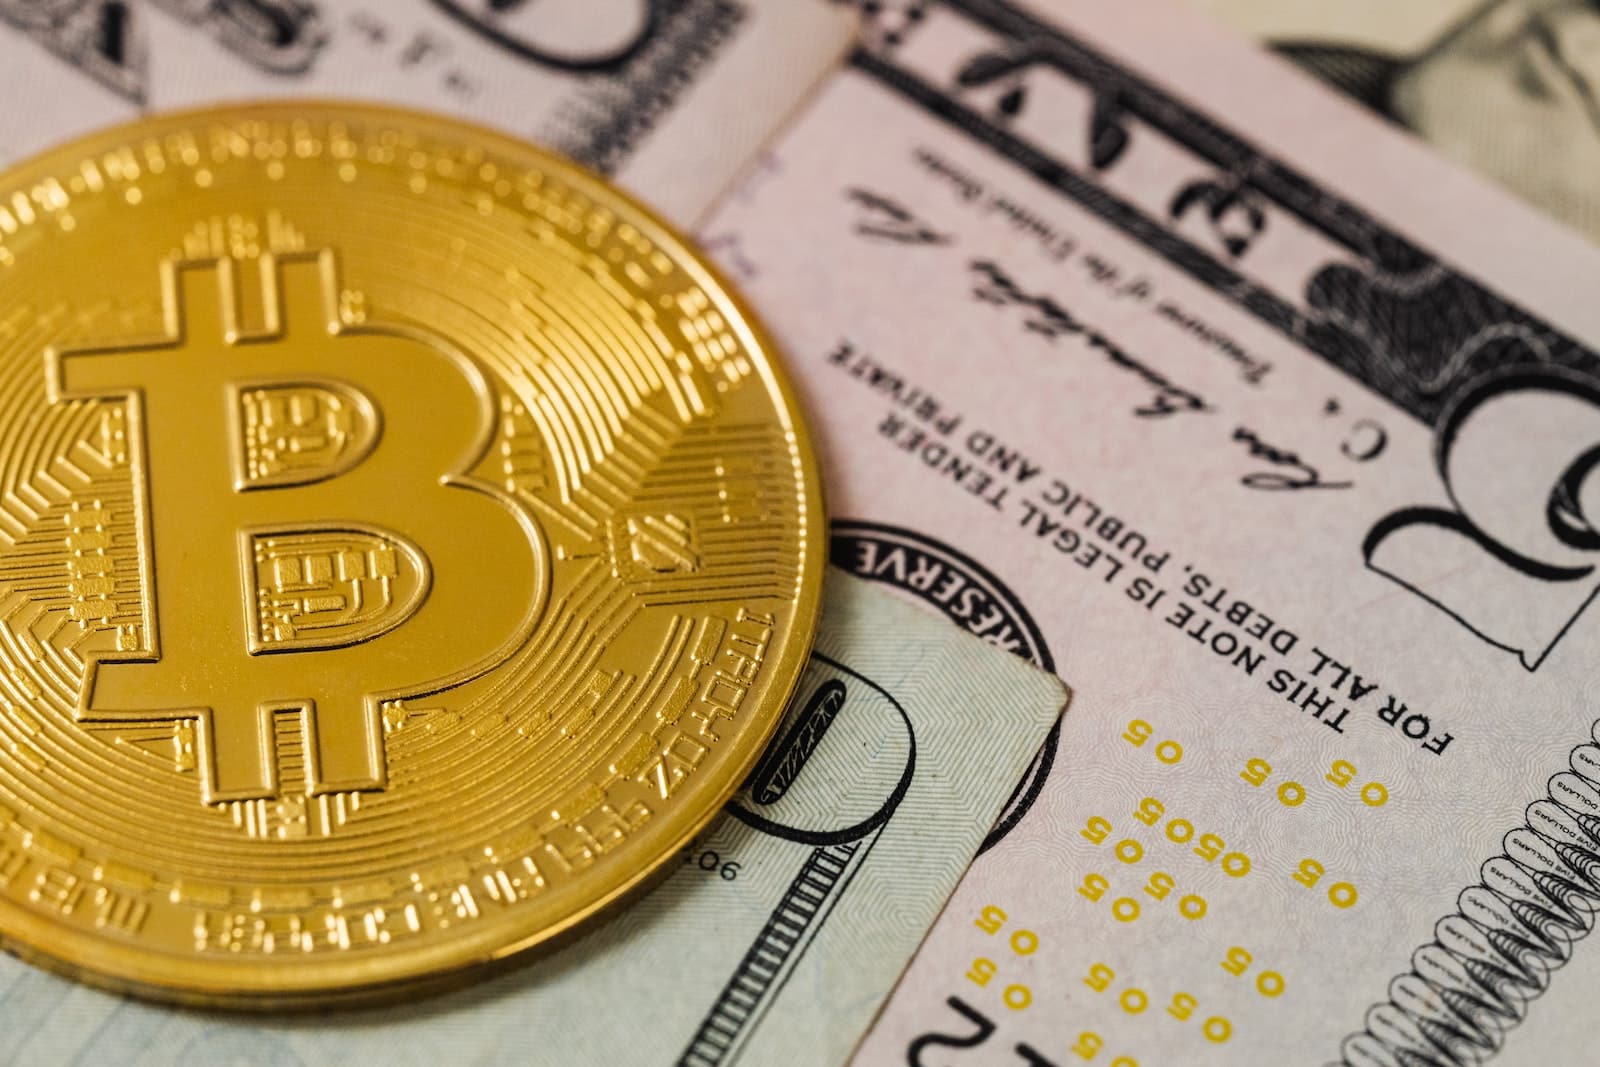 Close-up of a Gold Bitcoin Coin and Cash